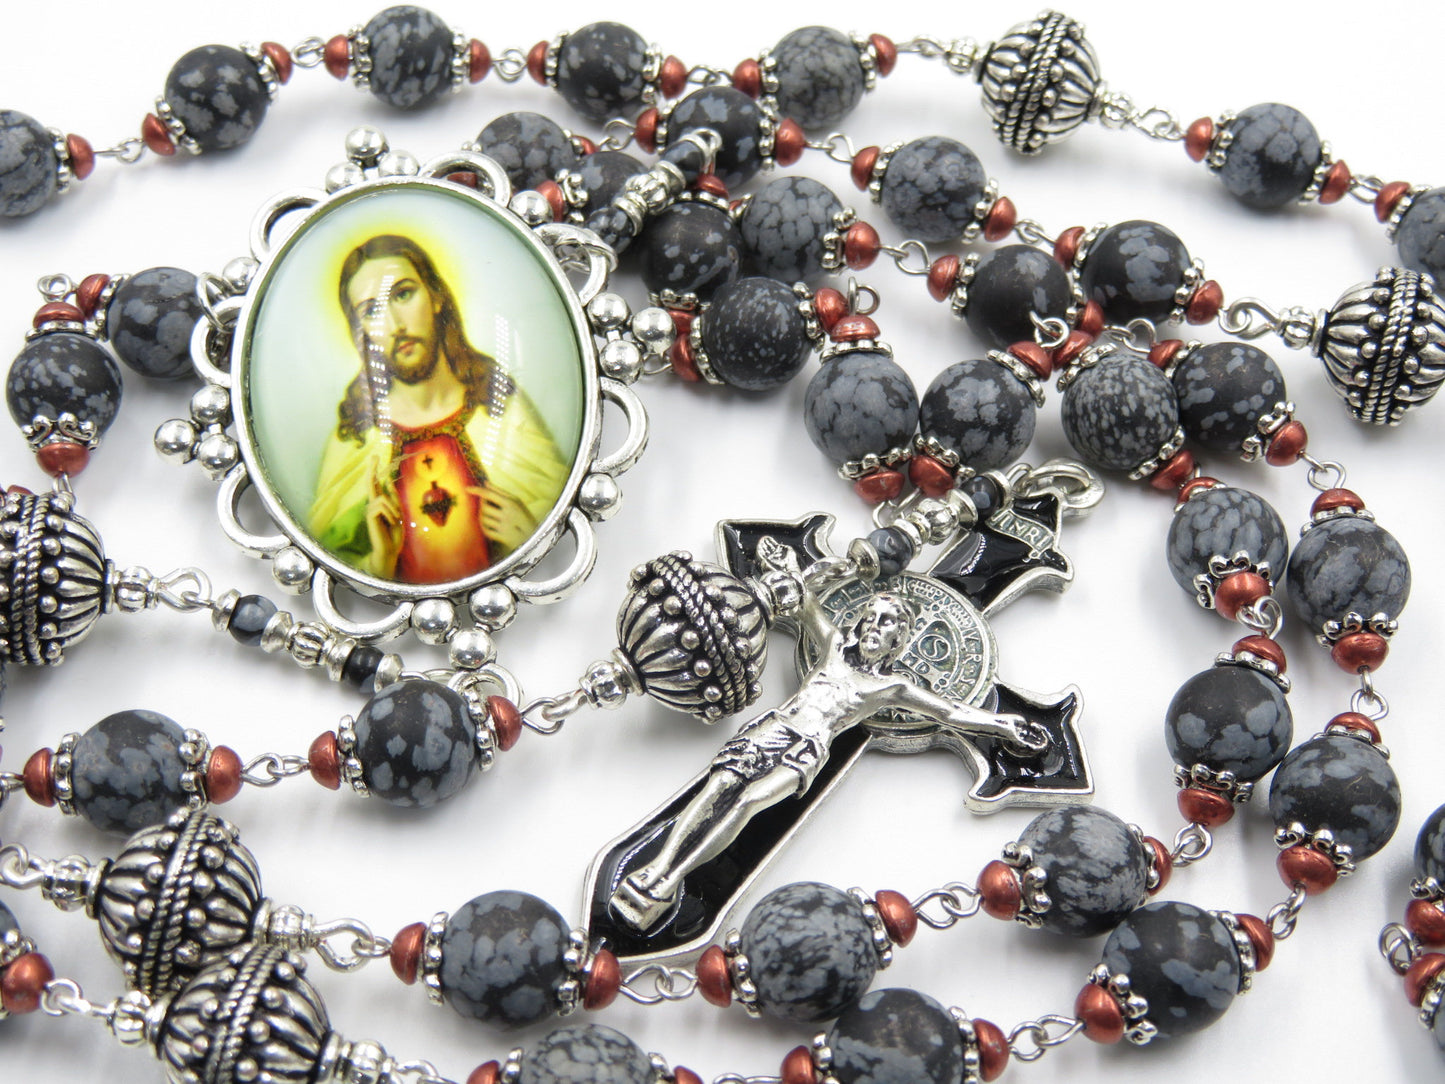 Large Heirloom Gemstone Rosary beads, Sacred Heart rosaries, St Benedict Crucifix, Wall Hanging Rosary beads, Religious Wedding gift.